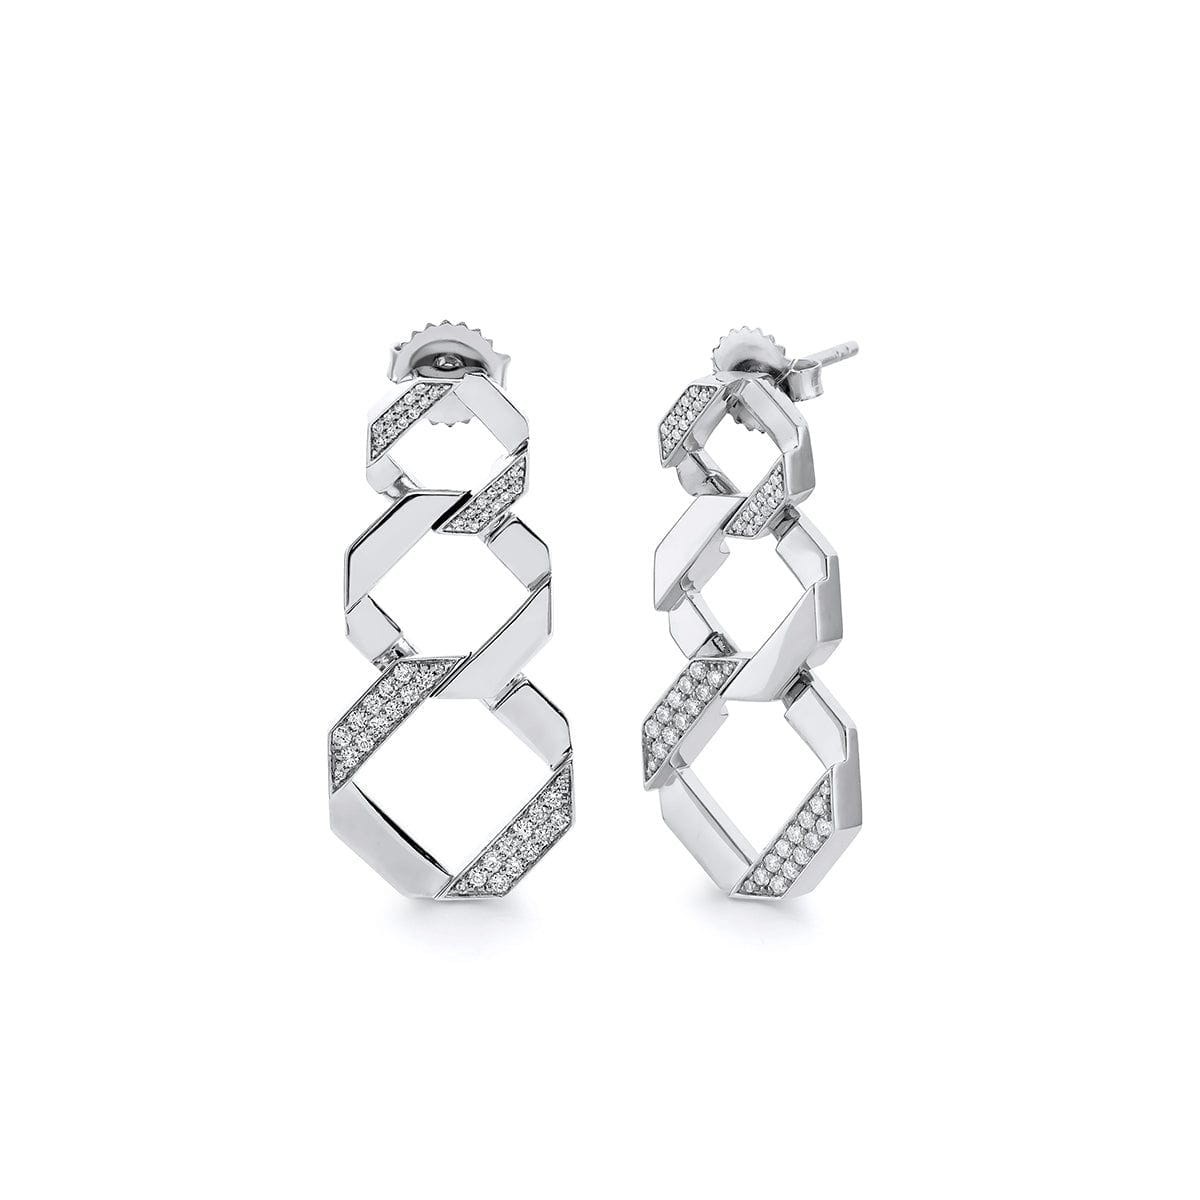 MICHAEL M Fashion Rings 14K White Gold Octave Chain Link Drop Earrings